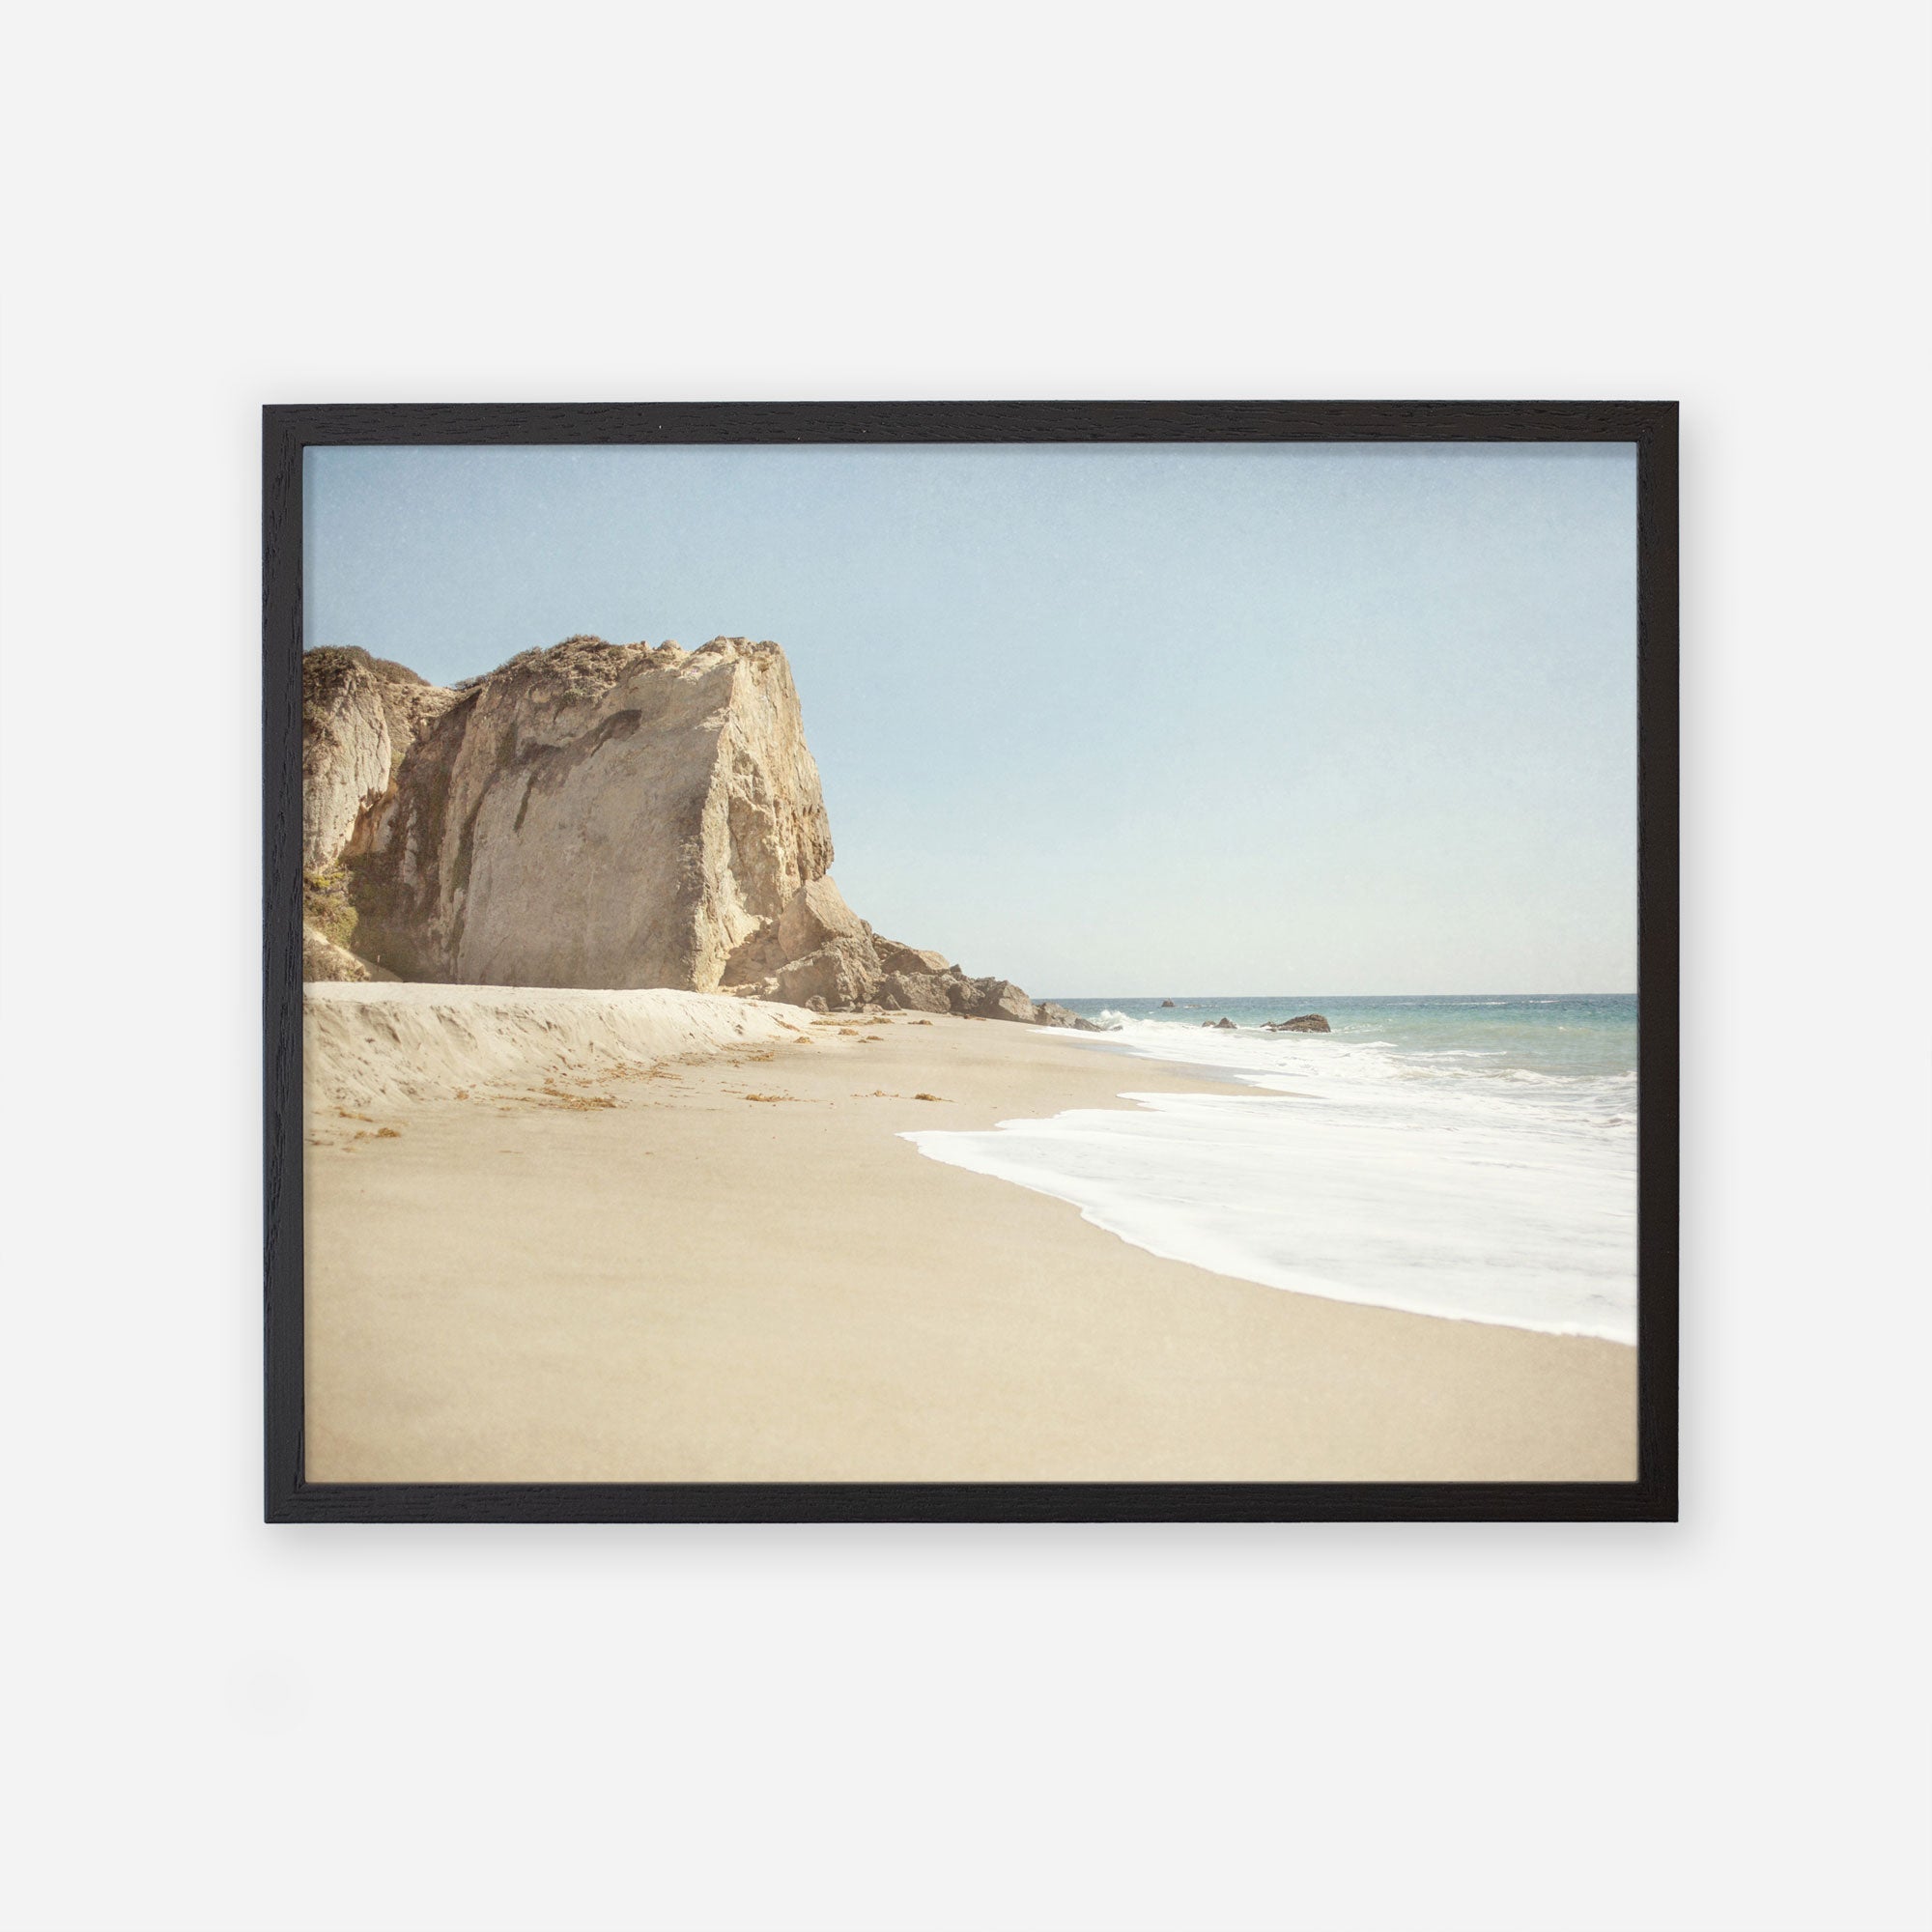 A framed photograph depicting a serene beach scene at Point Dume with a large cliff on the left, gentle waves washing onto the sandy shore, and a clear blue sky - Offley Green&#39;s California Malibu Print, &#39;Point Dume&#39;